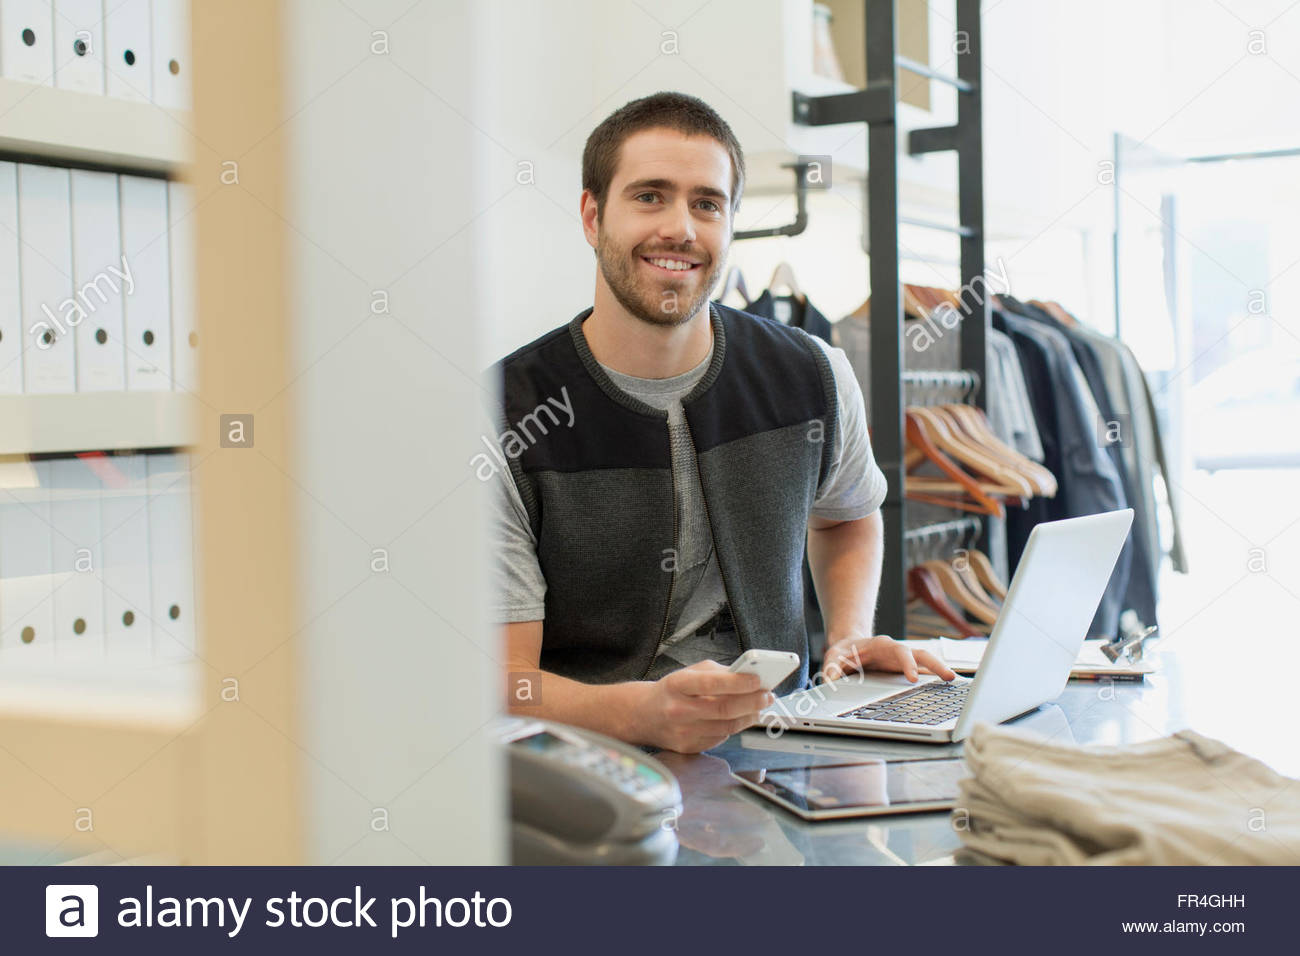 Bearded clerk with laptop, pc tablet and cell phone at desk. Stock Photo